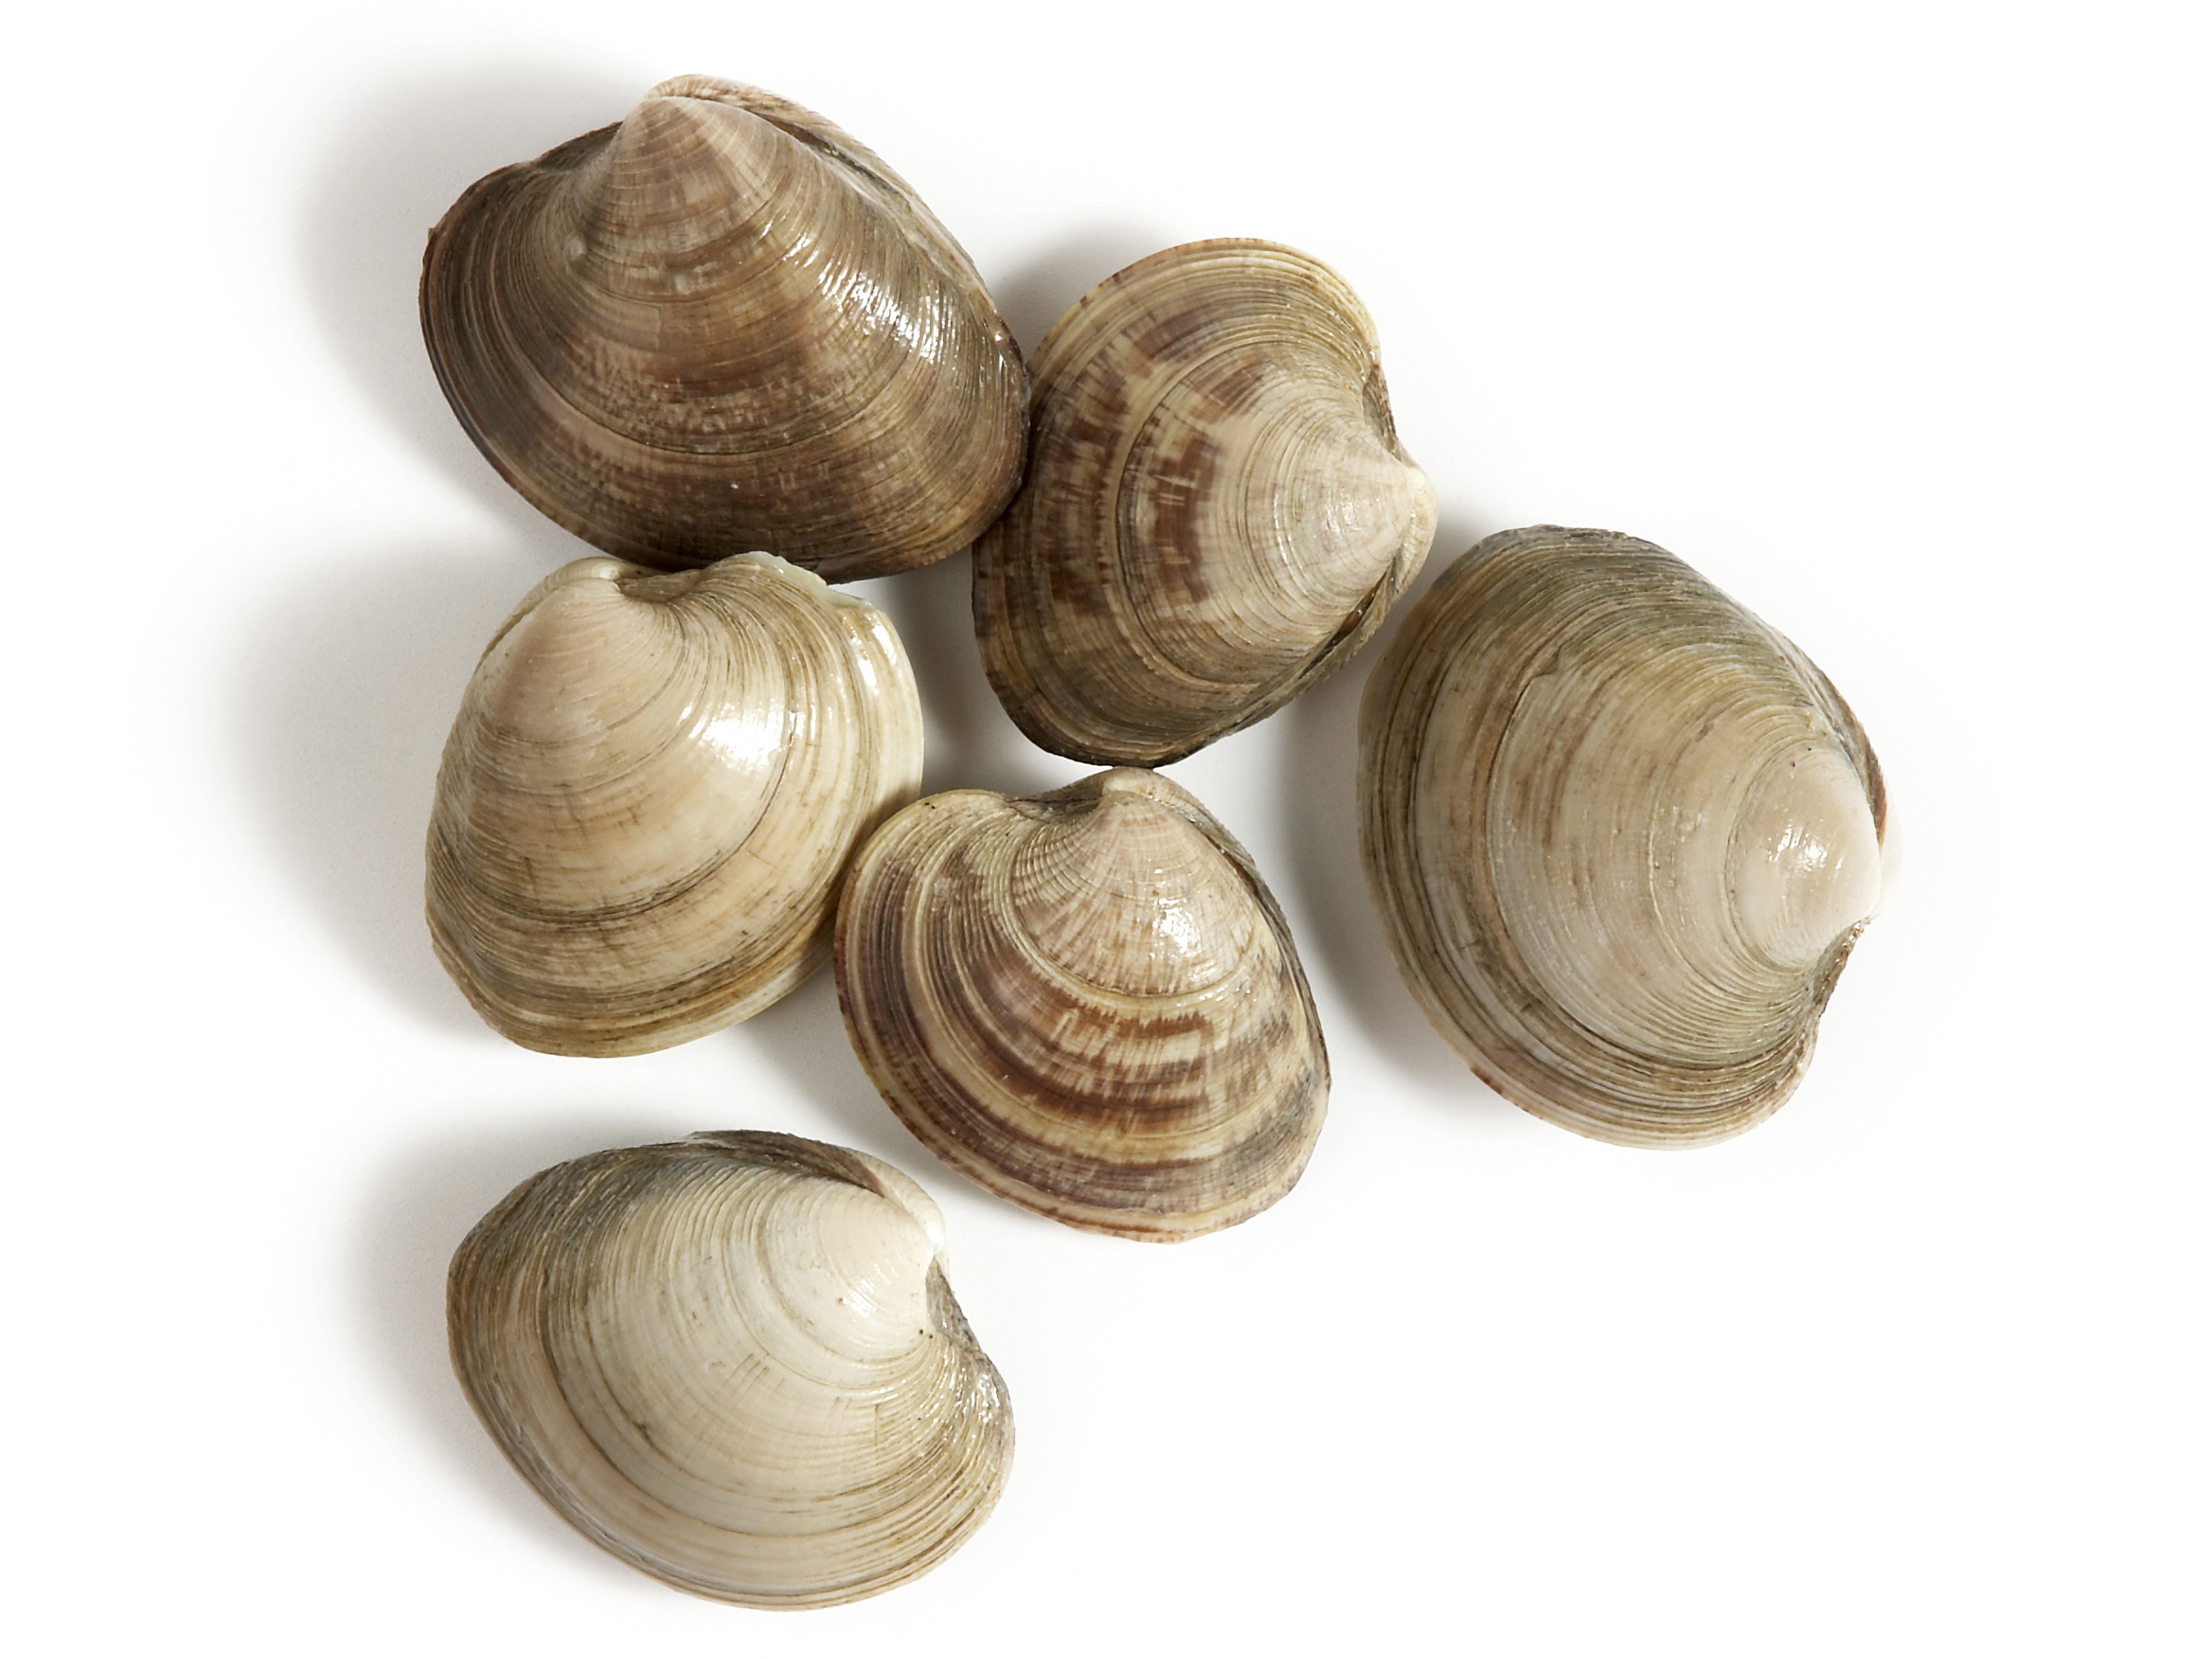 2336x1752 > Clams Wallpapers